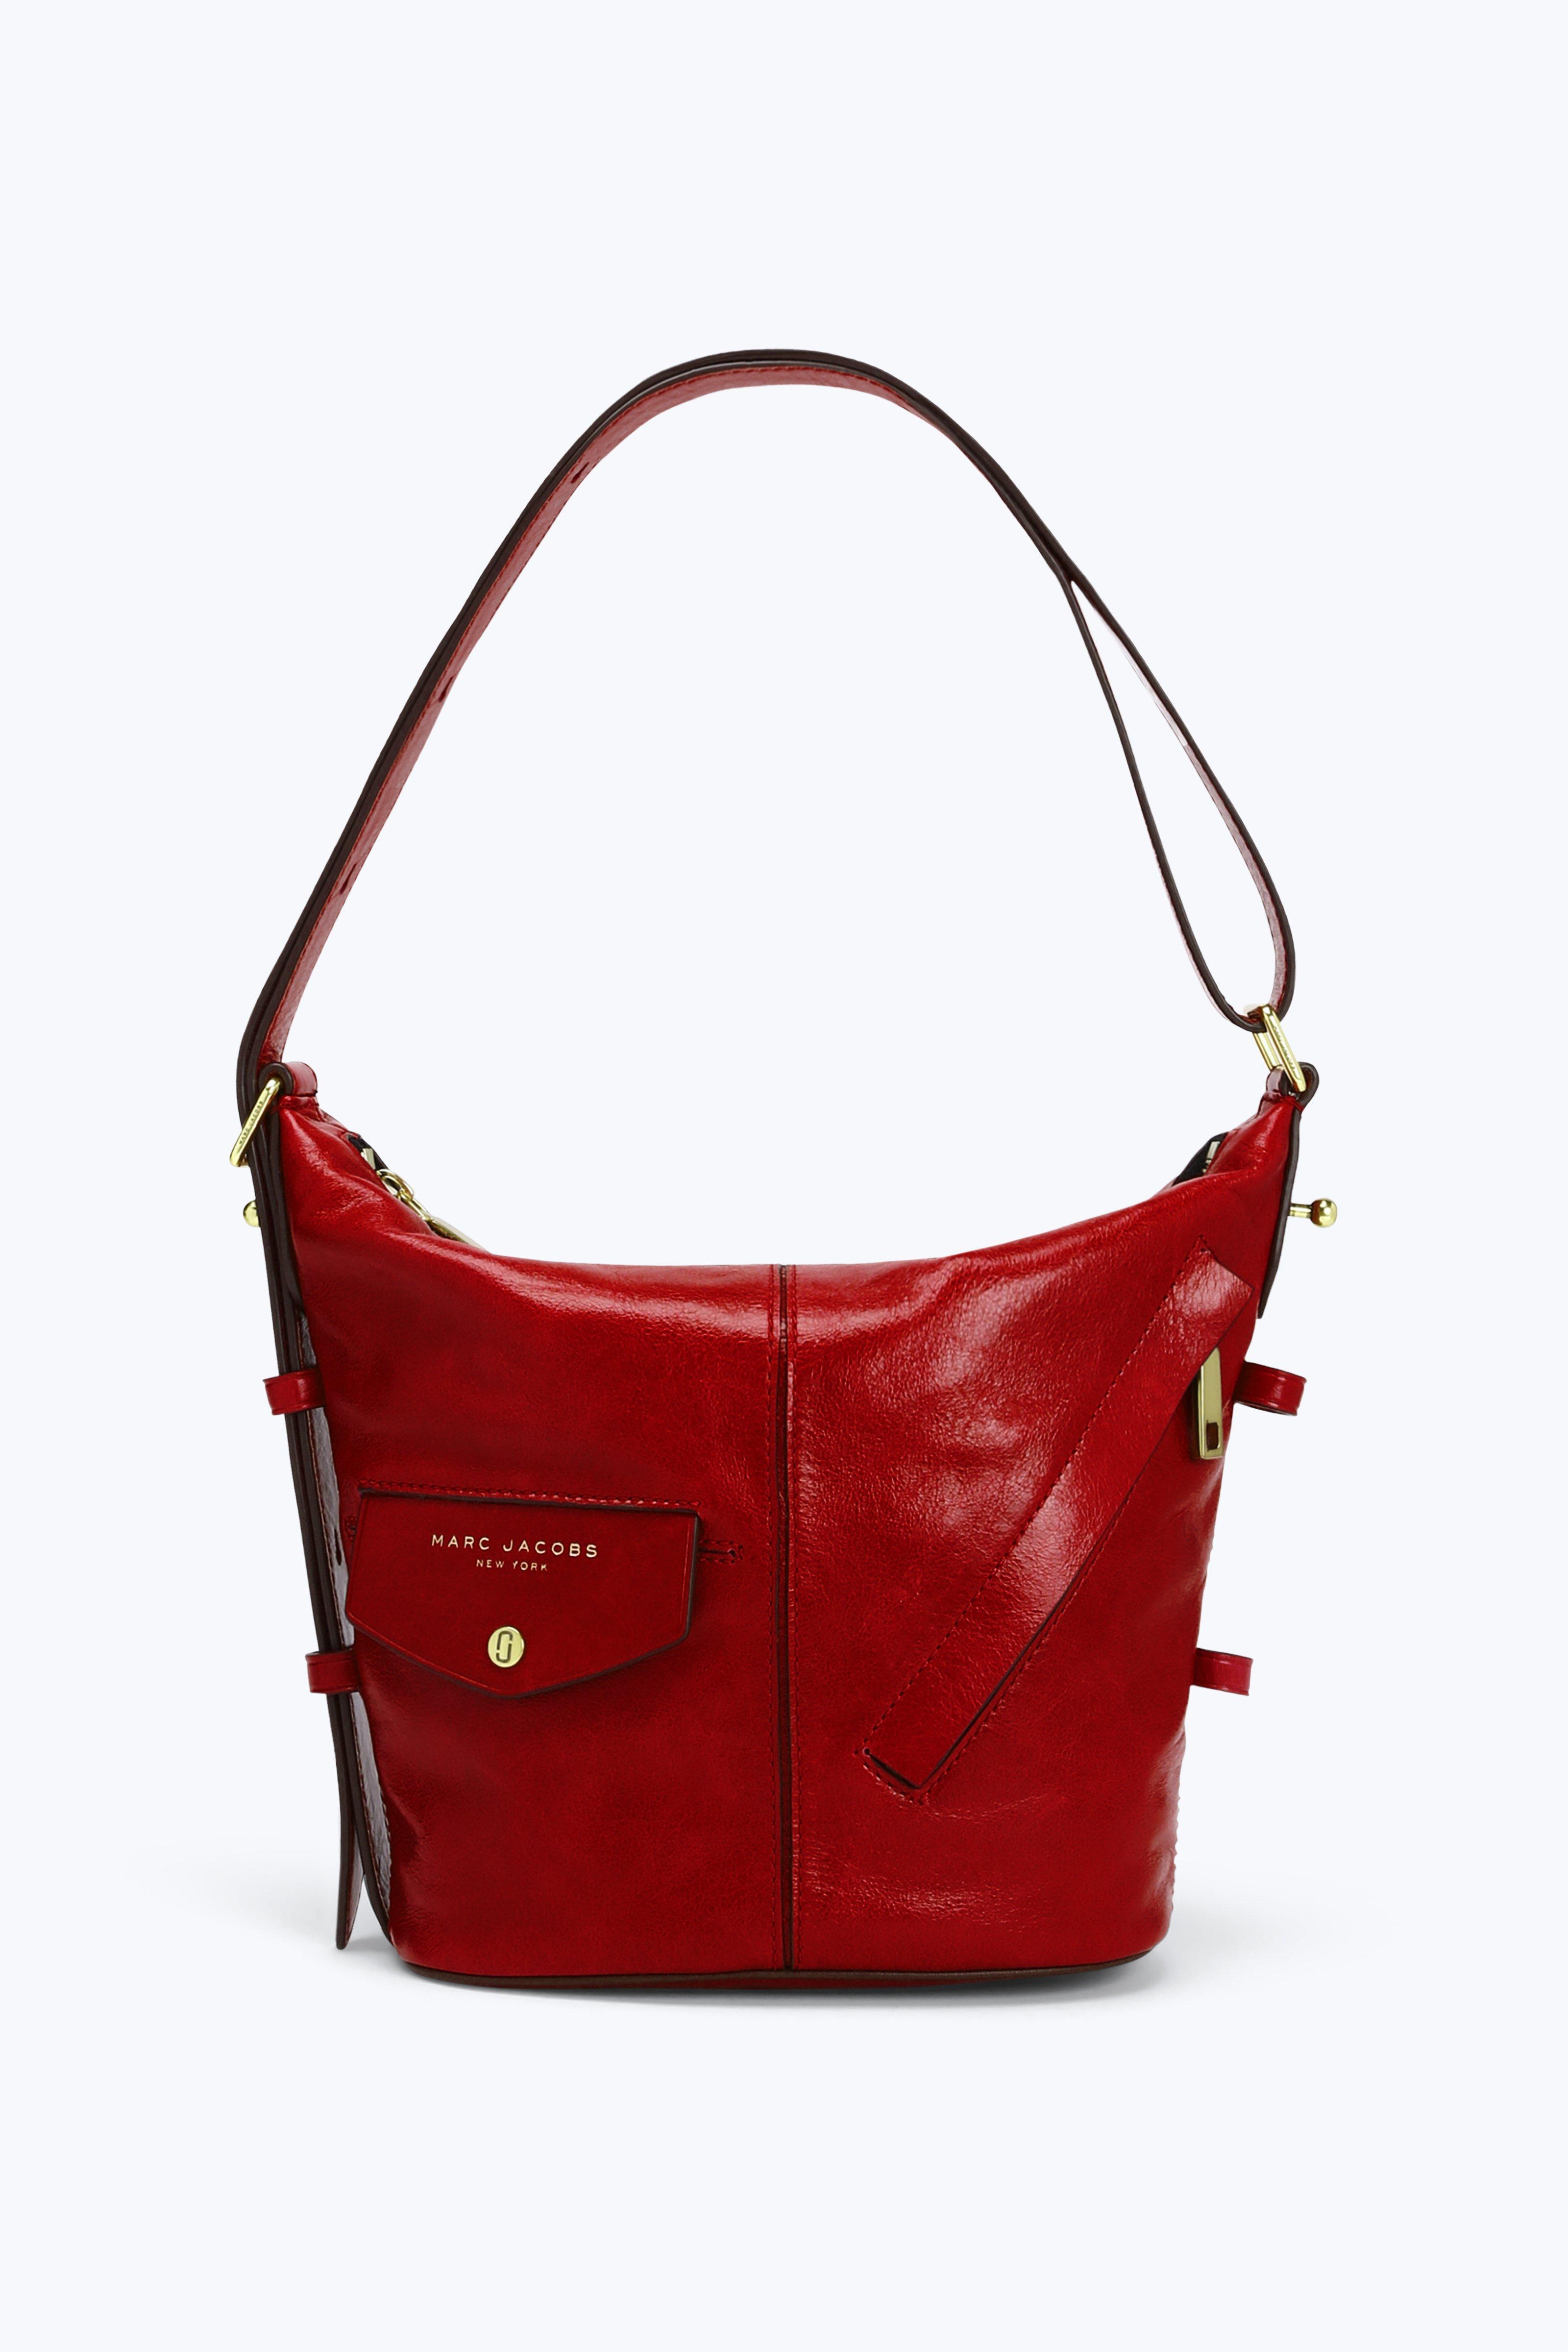 Marc Jacobs The Vintage Mini Sling Bag in Red - Lyst